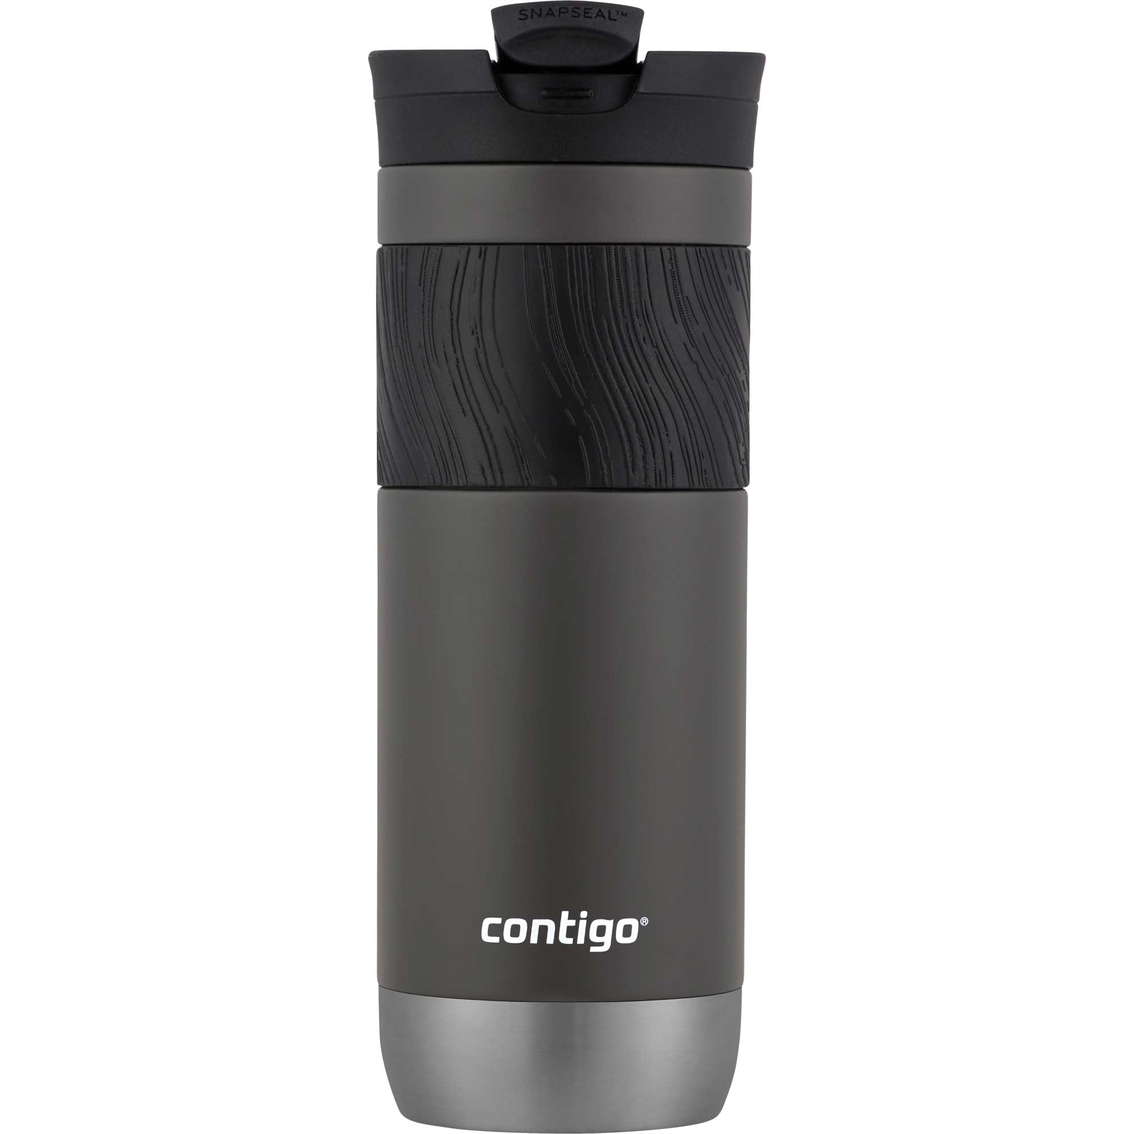 Contigo Couture SnapSeal Insulated Stainless Steel 20 oz. Travel Mug with Grip - Image 2 of 4